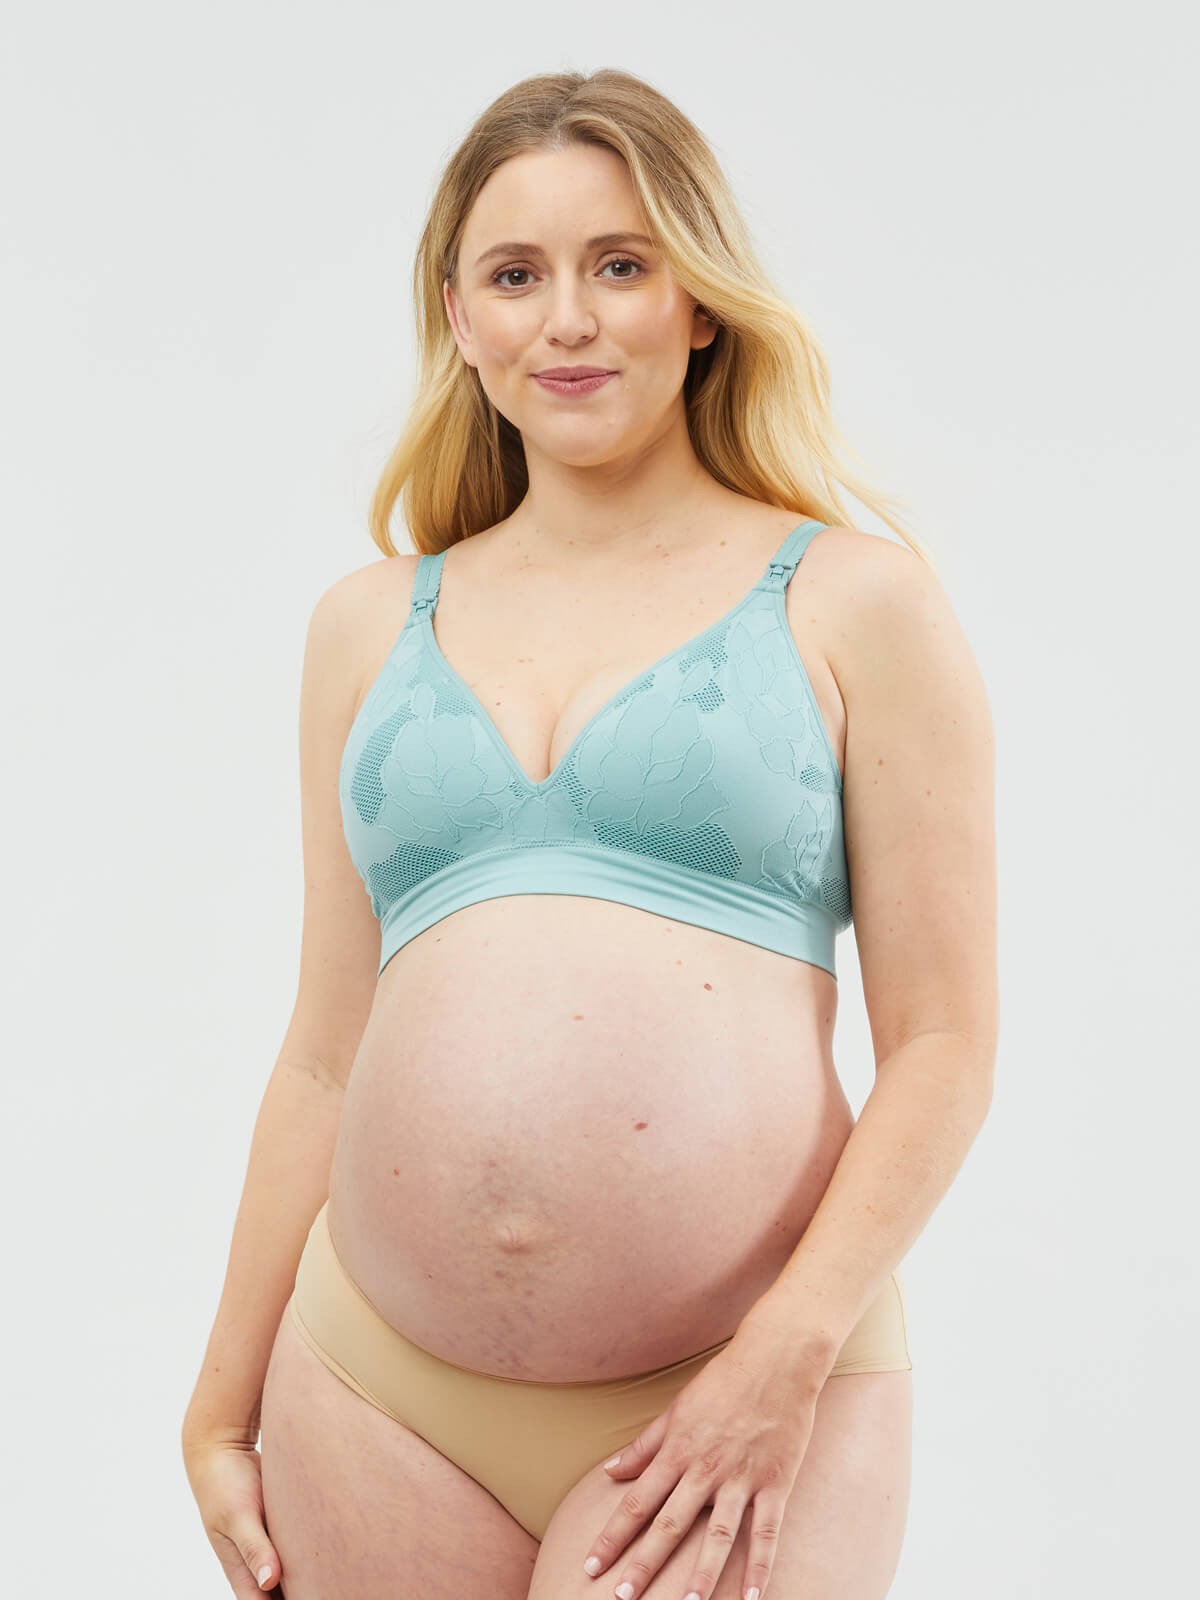 Cake Maternity Women's Freckles Recycled Wire Free Nursing Bra for